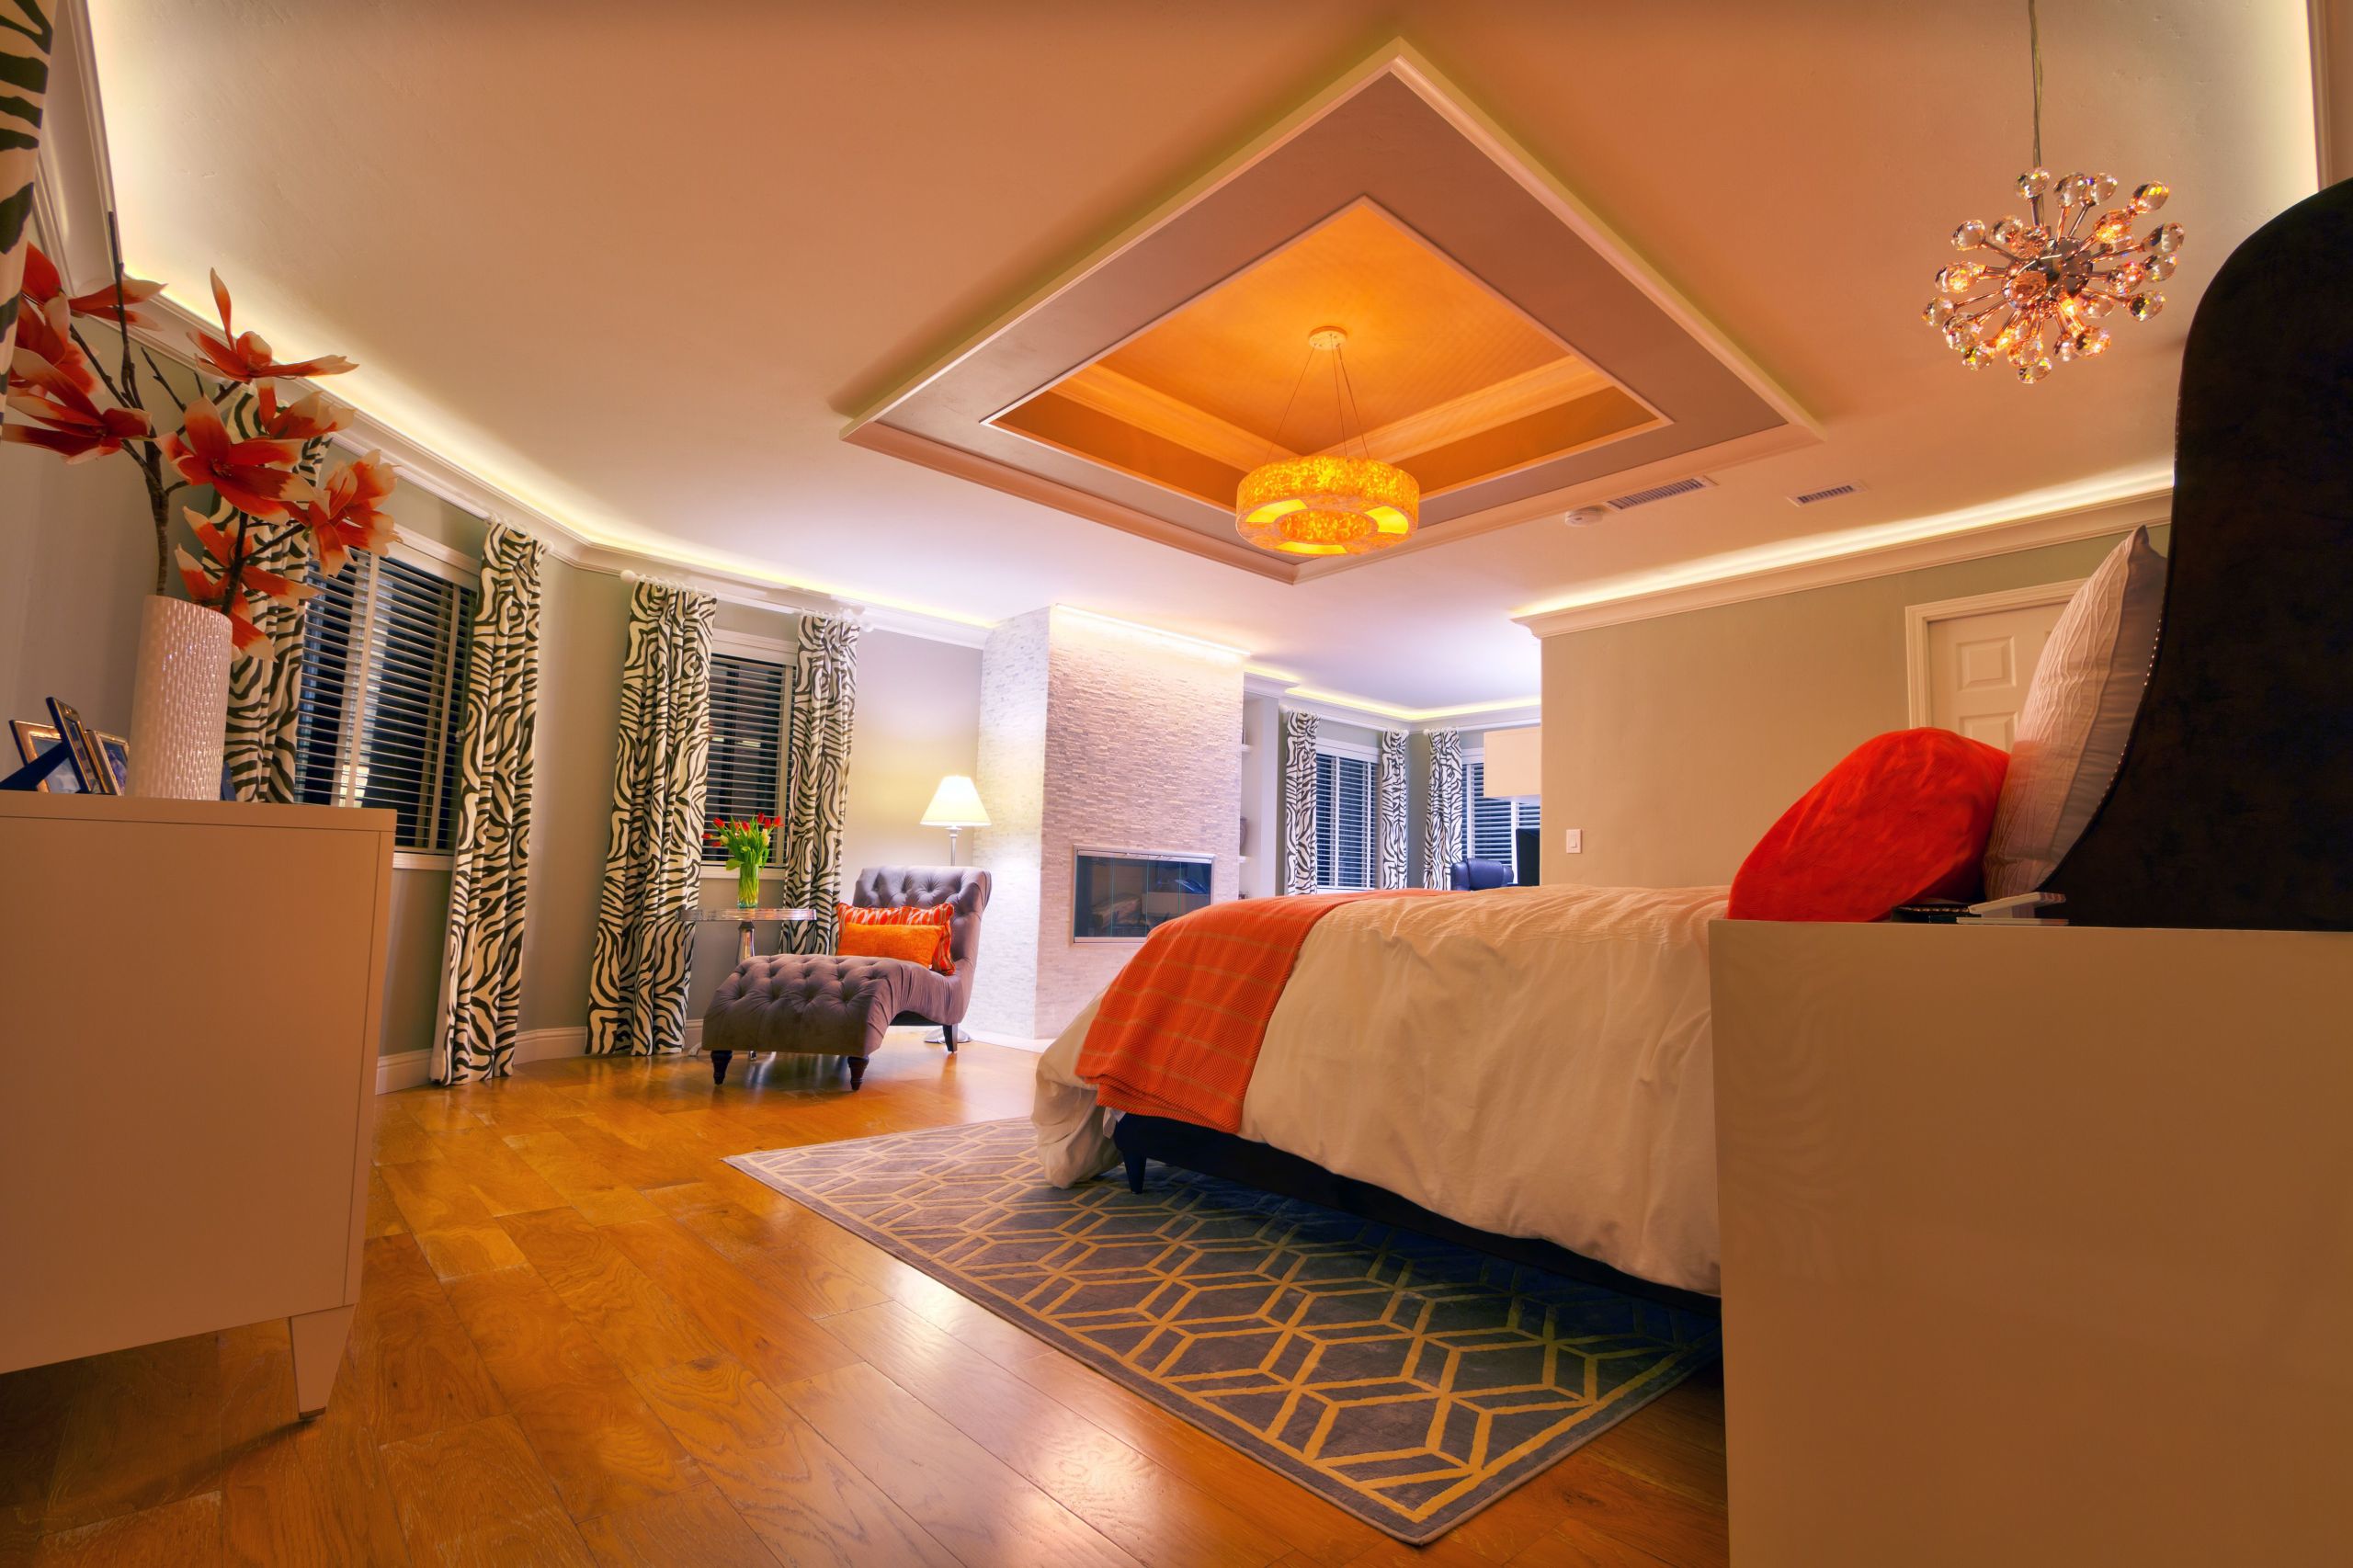 Bedroom Ceiling Light
 Ultimate Guide to Bedroom Ceiling Lights Traba Homes